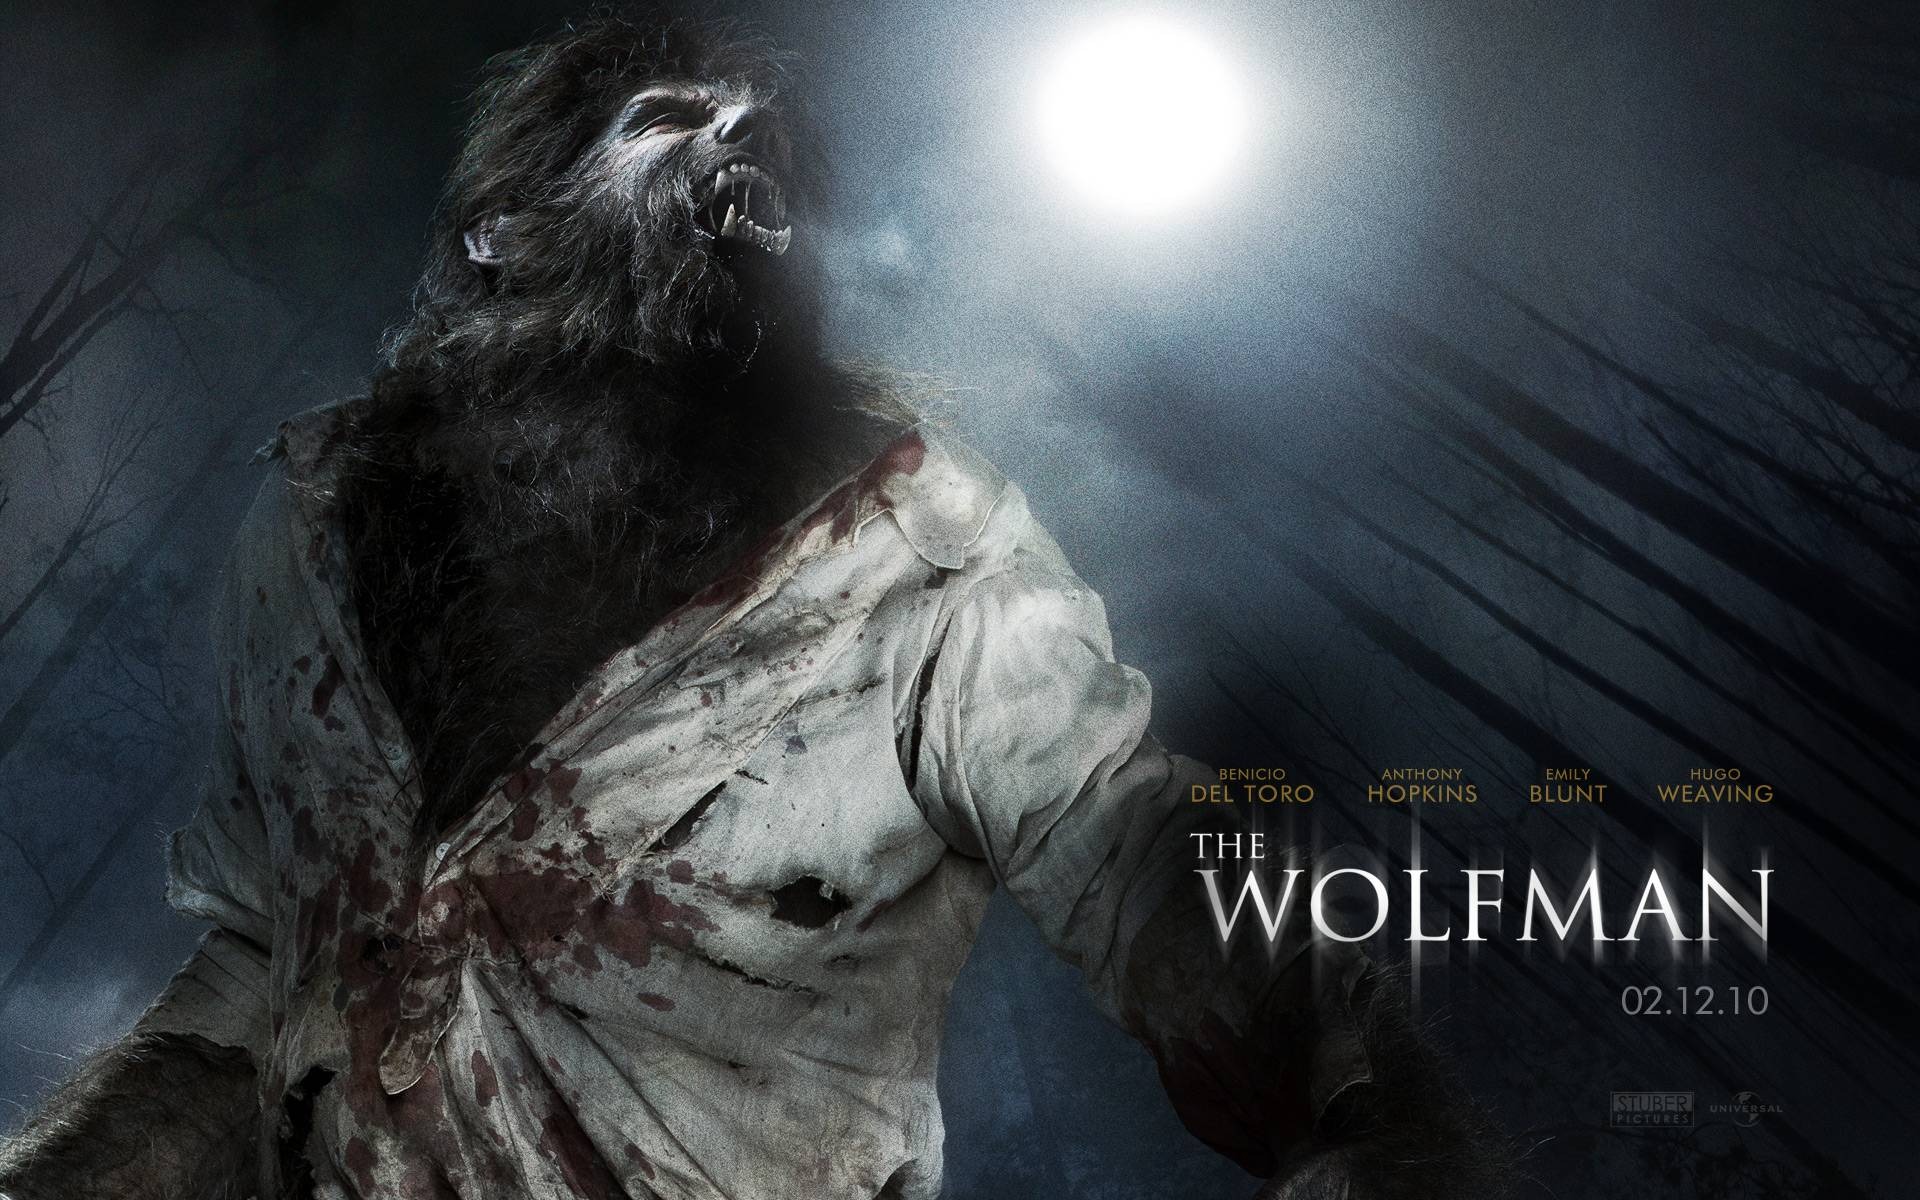 The Wolfman Movie Wallpapers #3 - 1920x1200